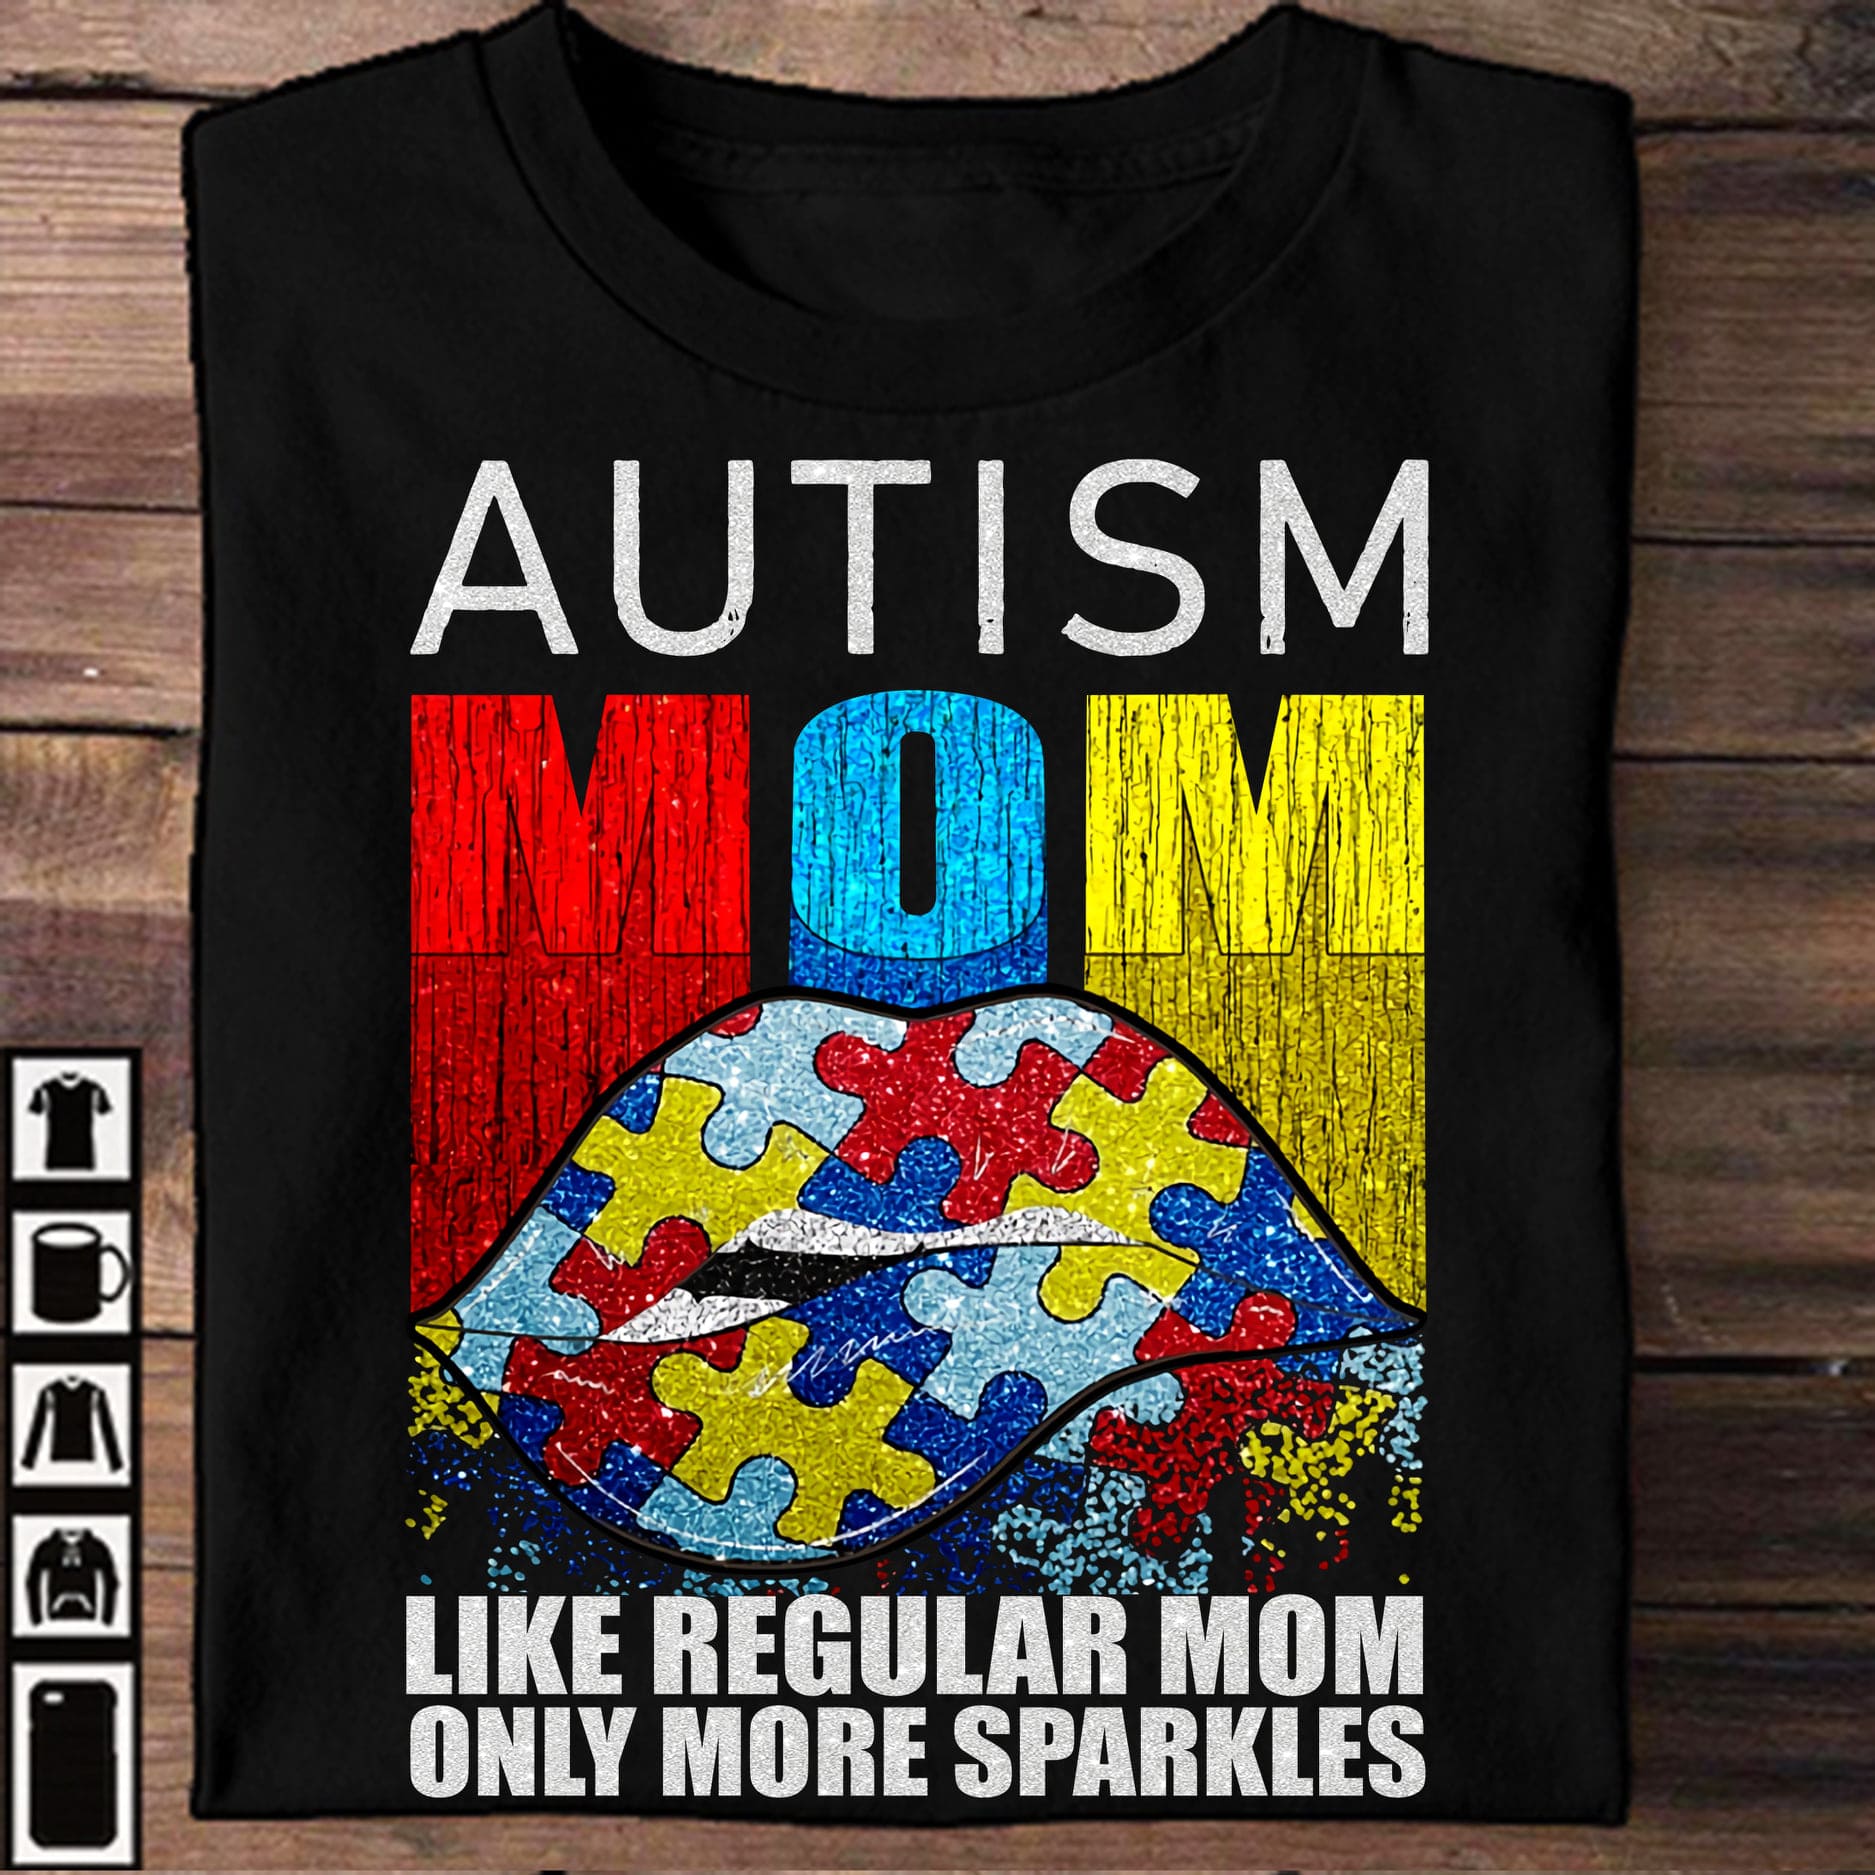 Autism Woman Lip - Autism mom like regular mom only more sparkles